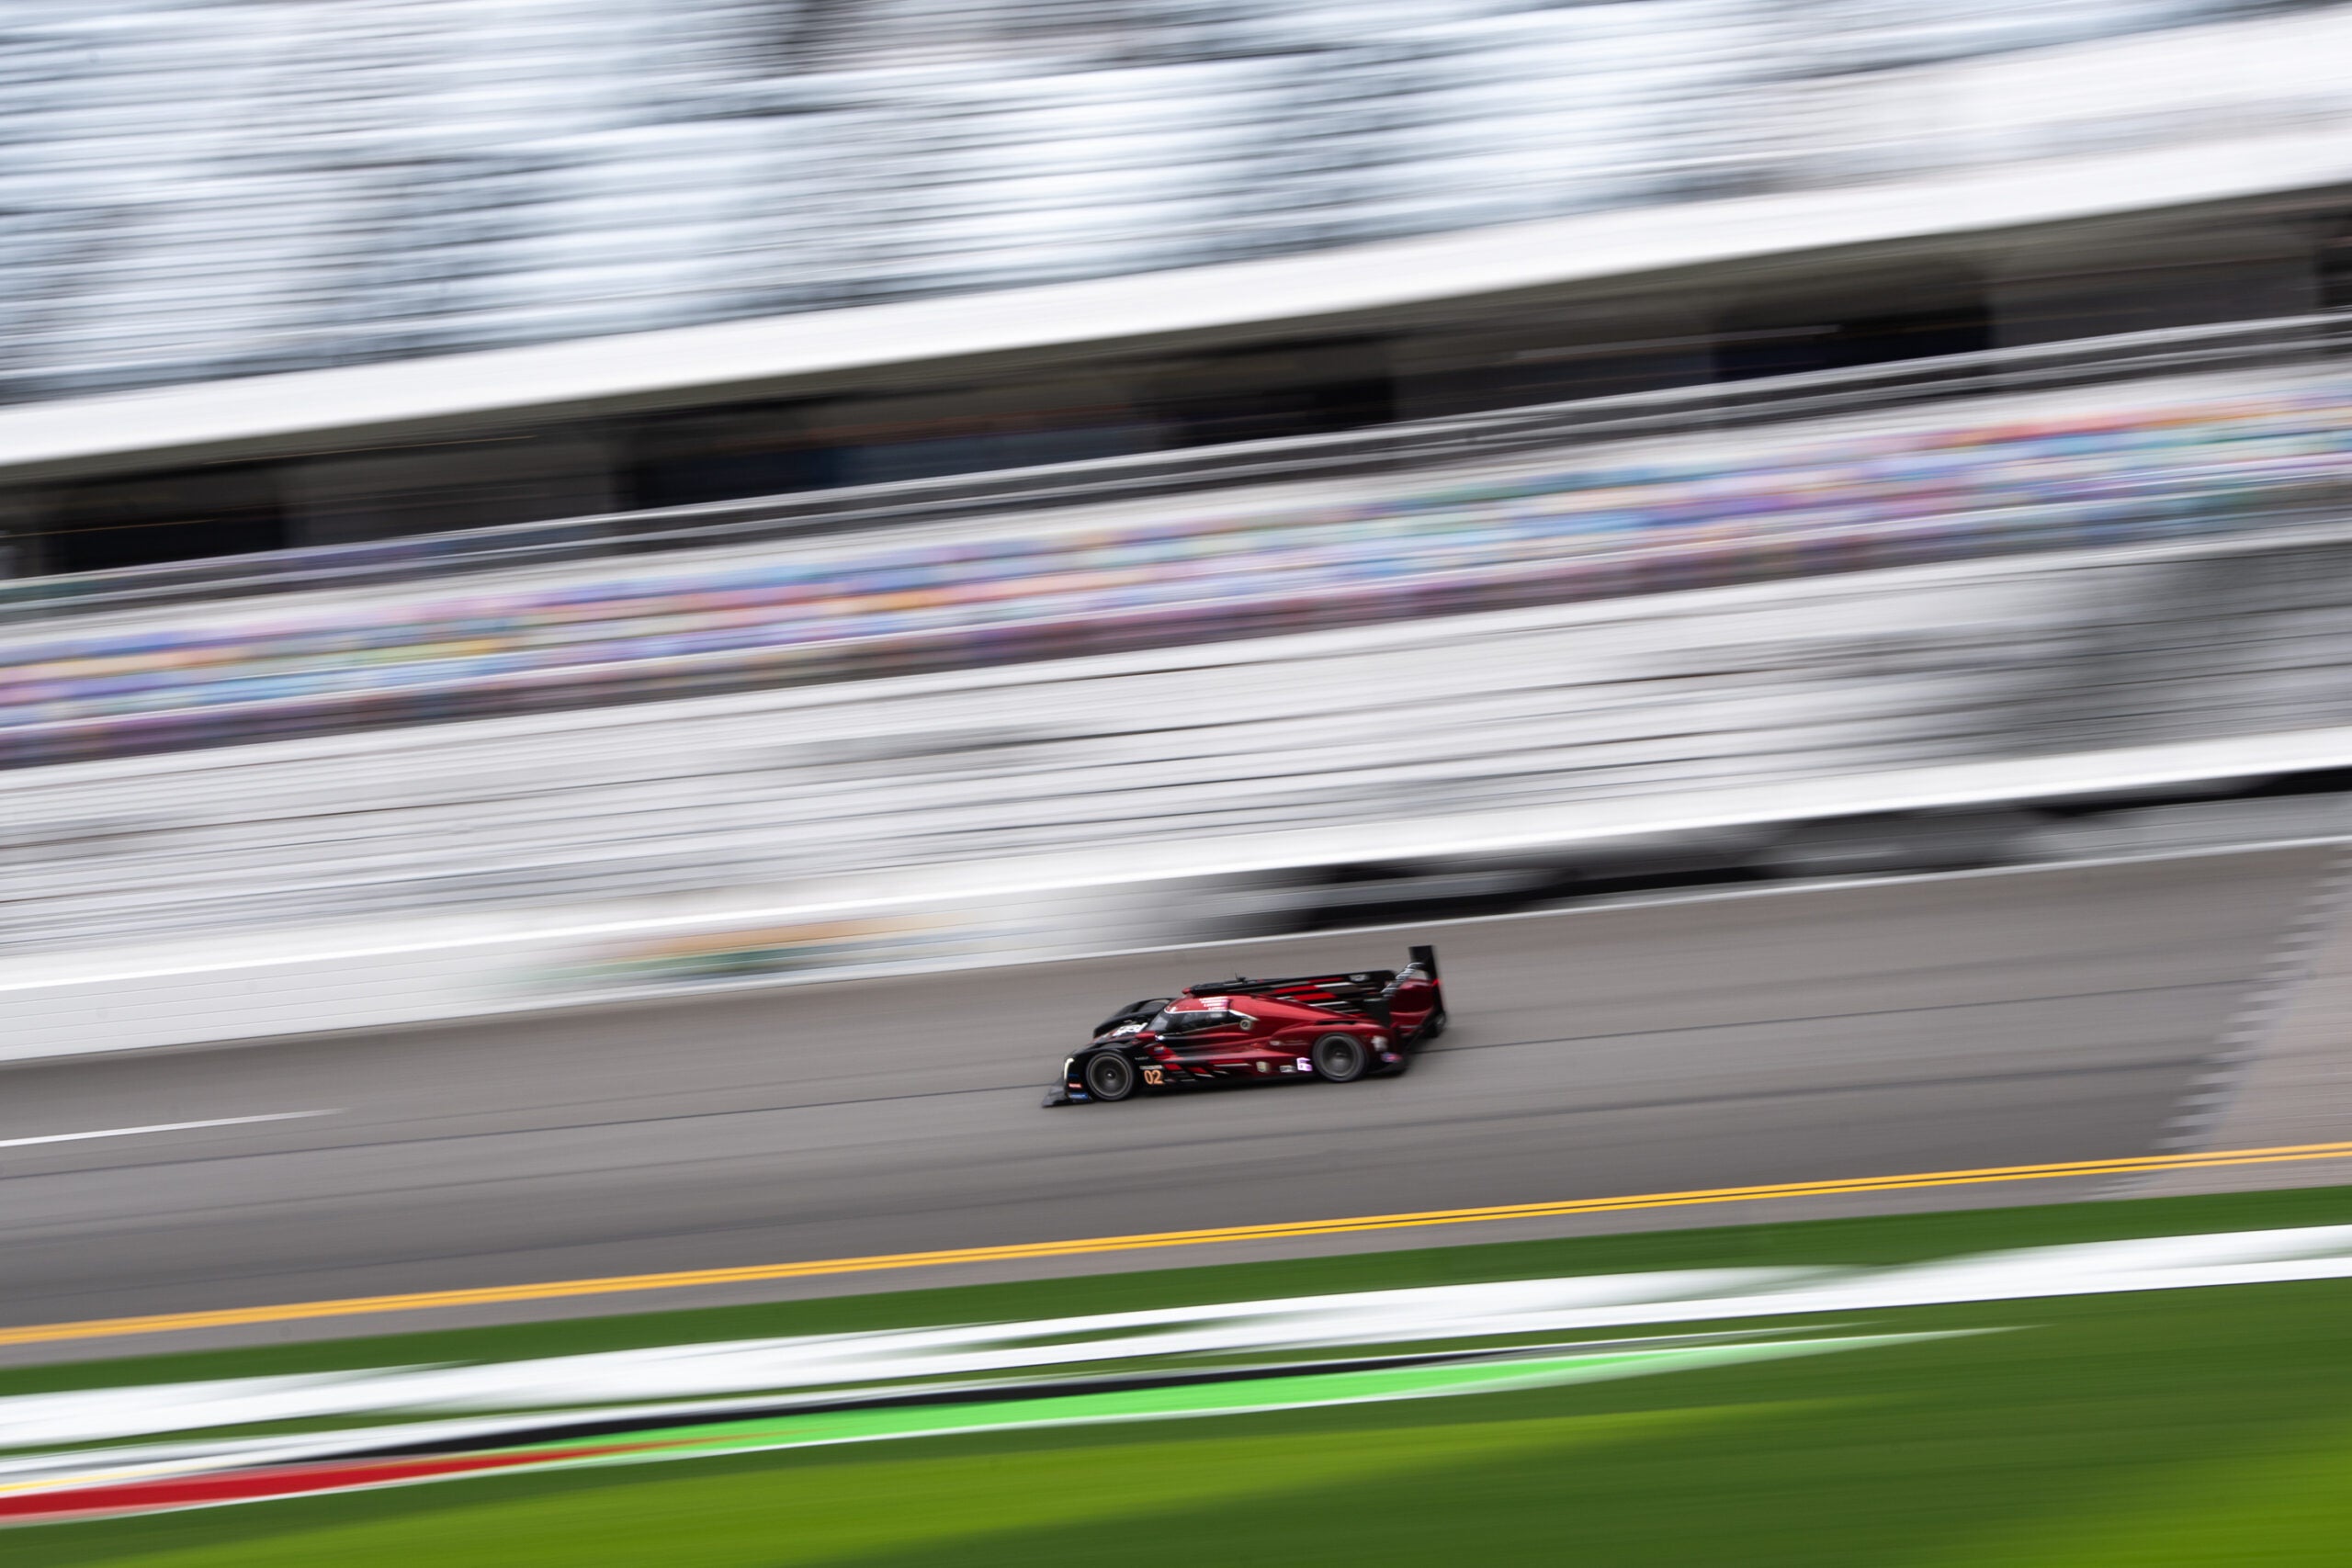 A photo by Jamey Price from the 2022 Rolex 24 at Daytona, a 24-hour race held at Daytona International Speedway.